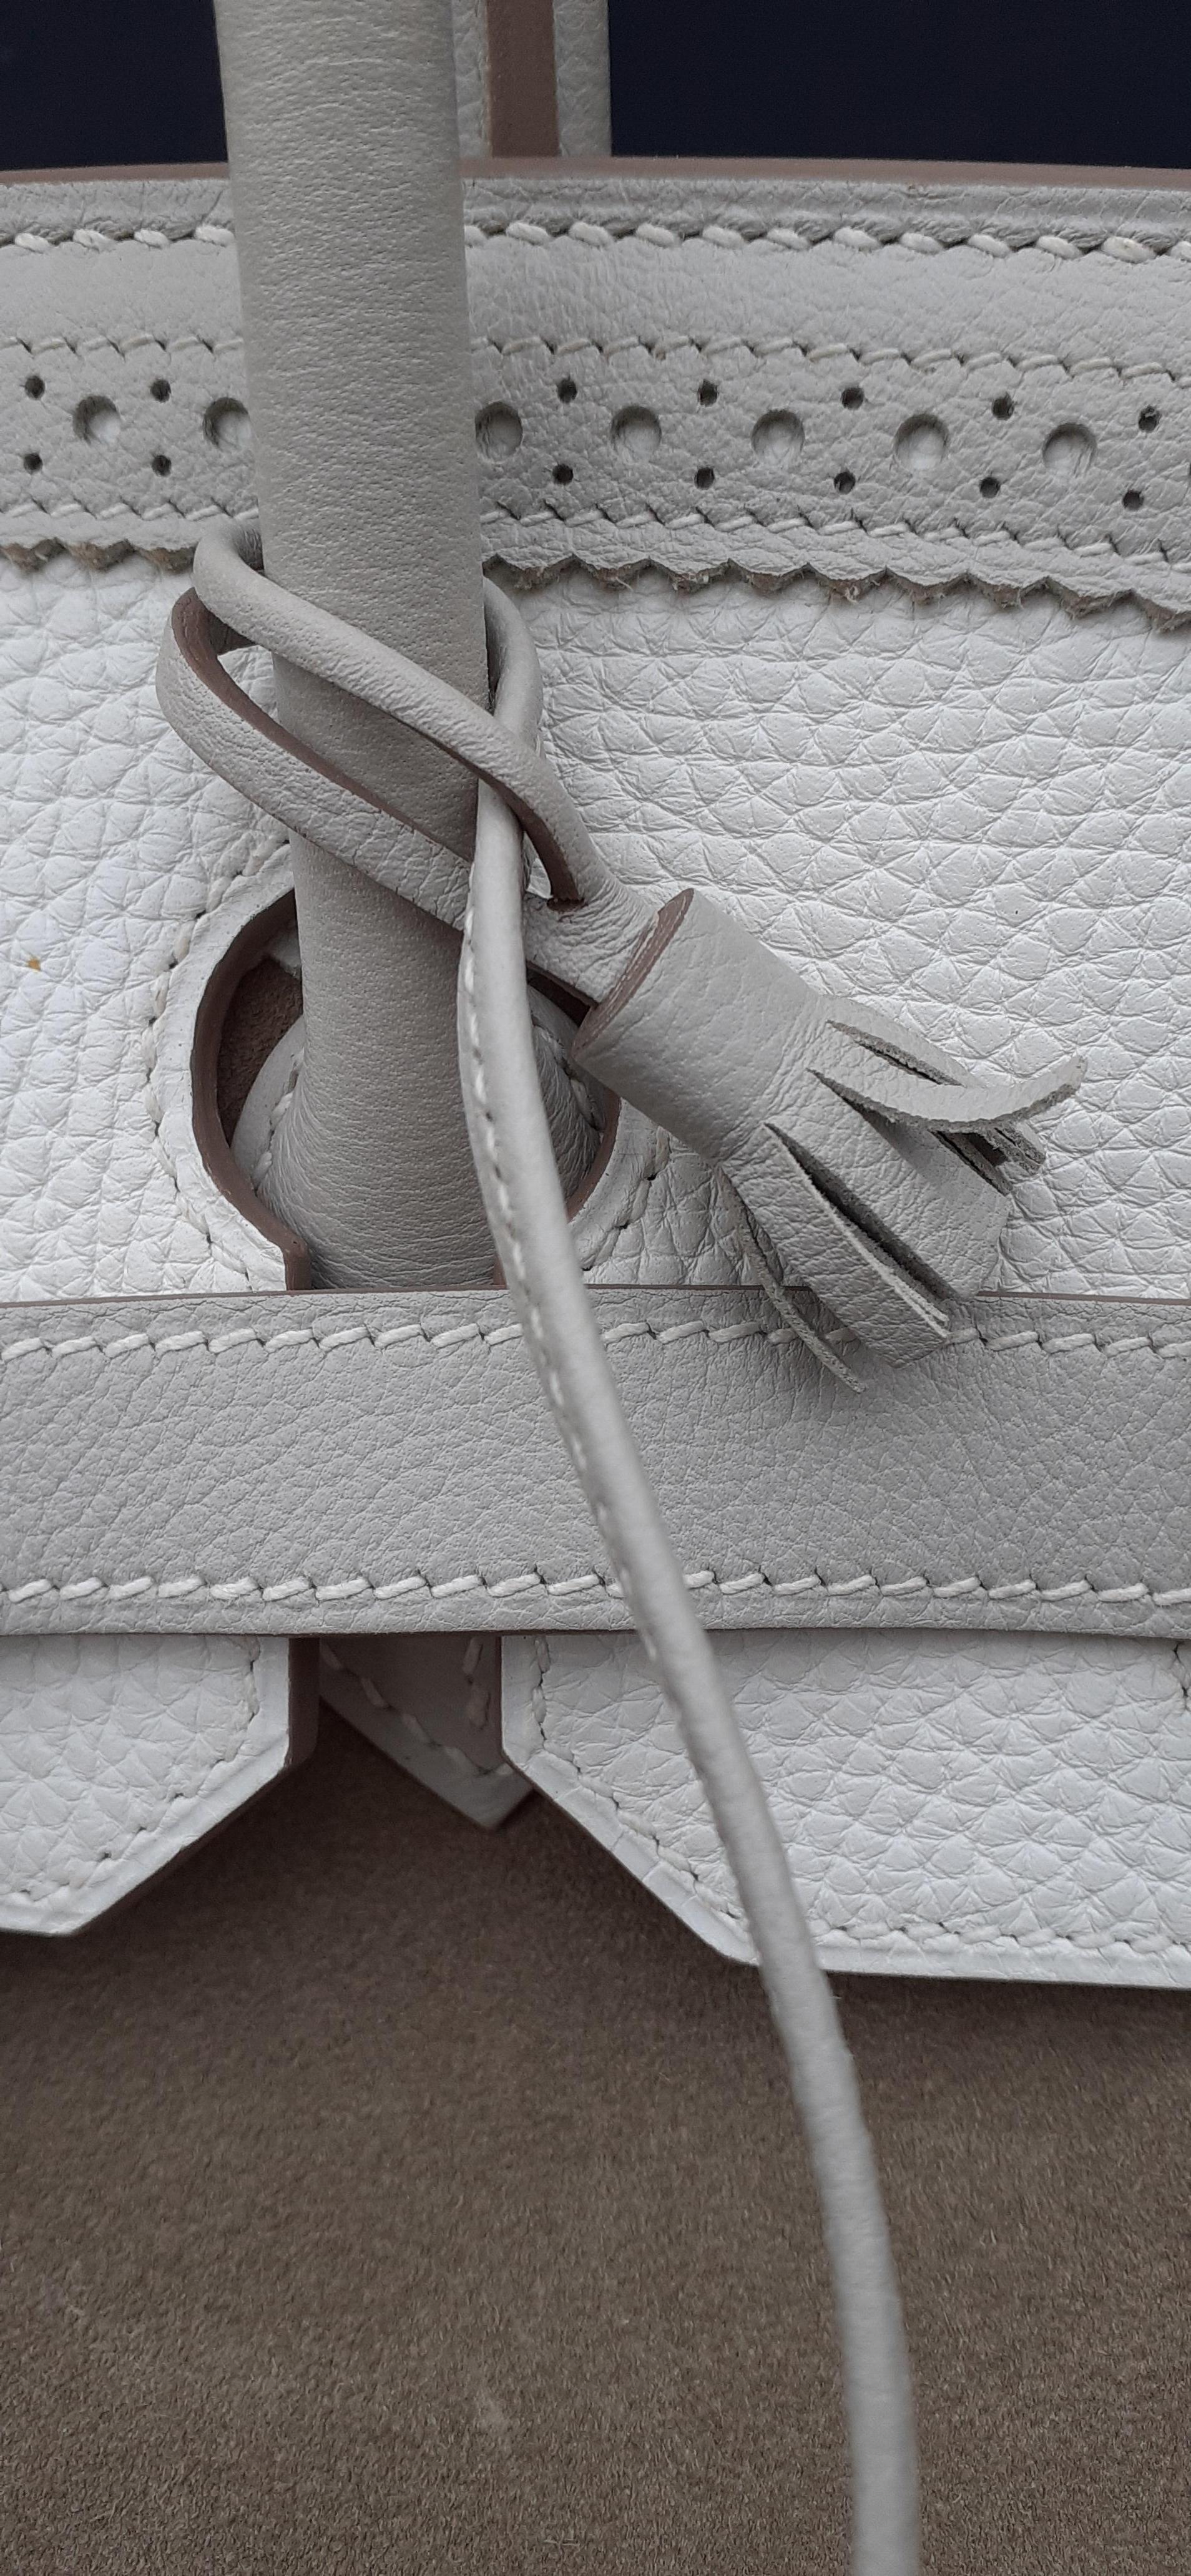 Hermès Birkin 35 Bag Limited Edition Ghillies Grizzly Doblis Grey White Caillou For Sale 2